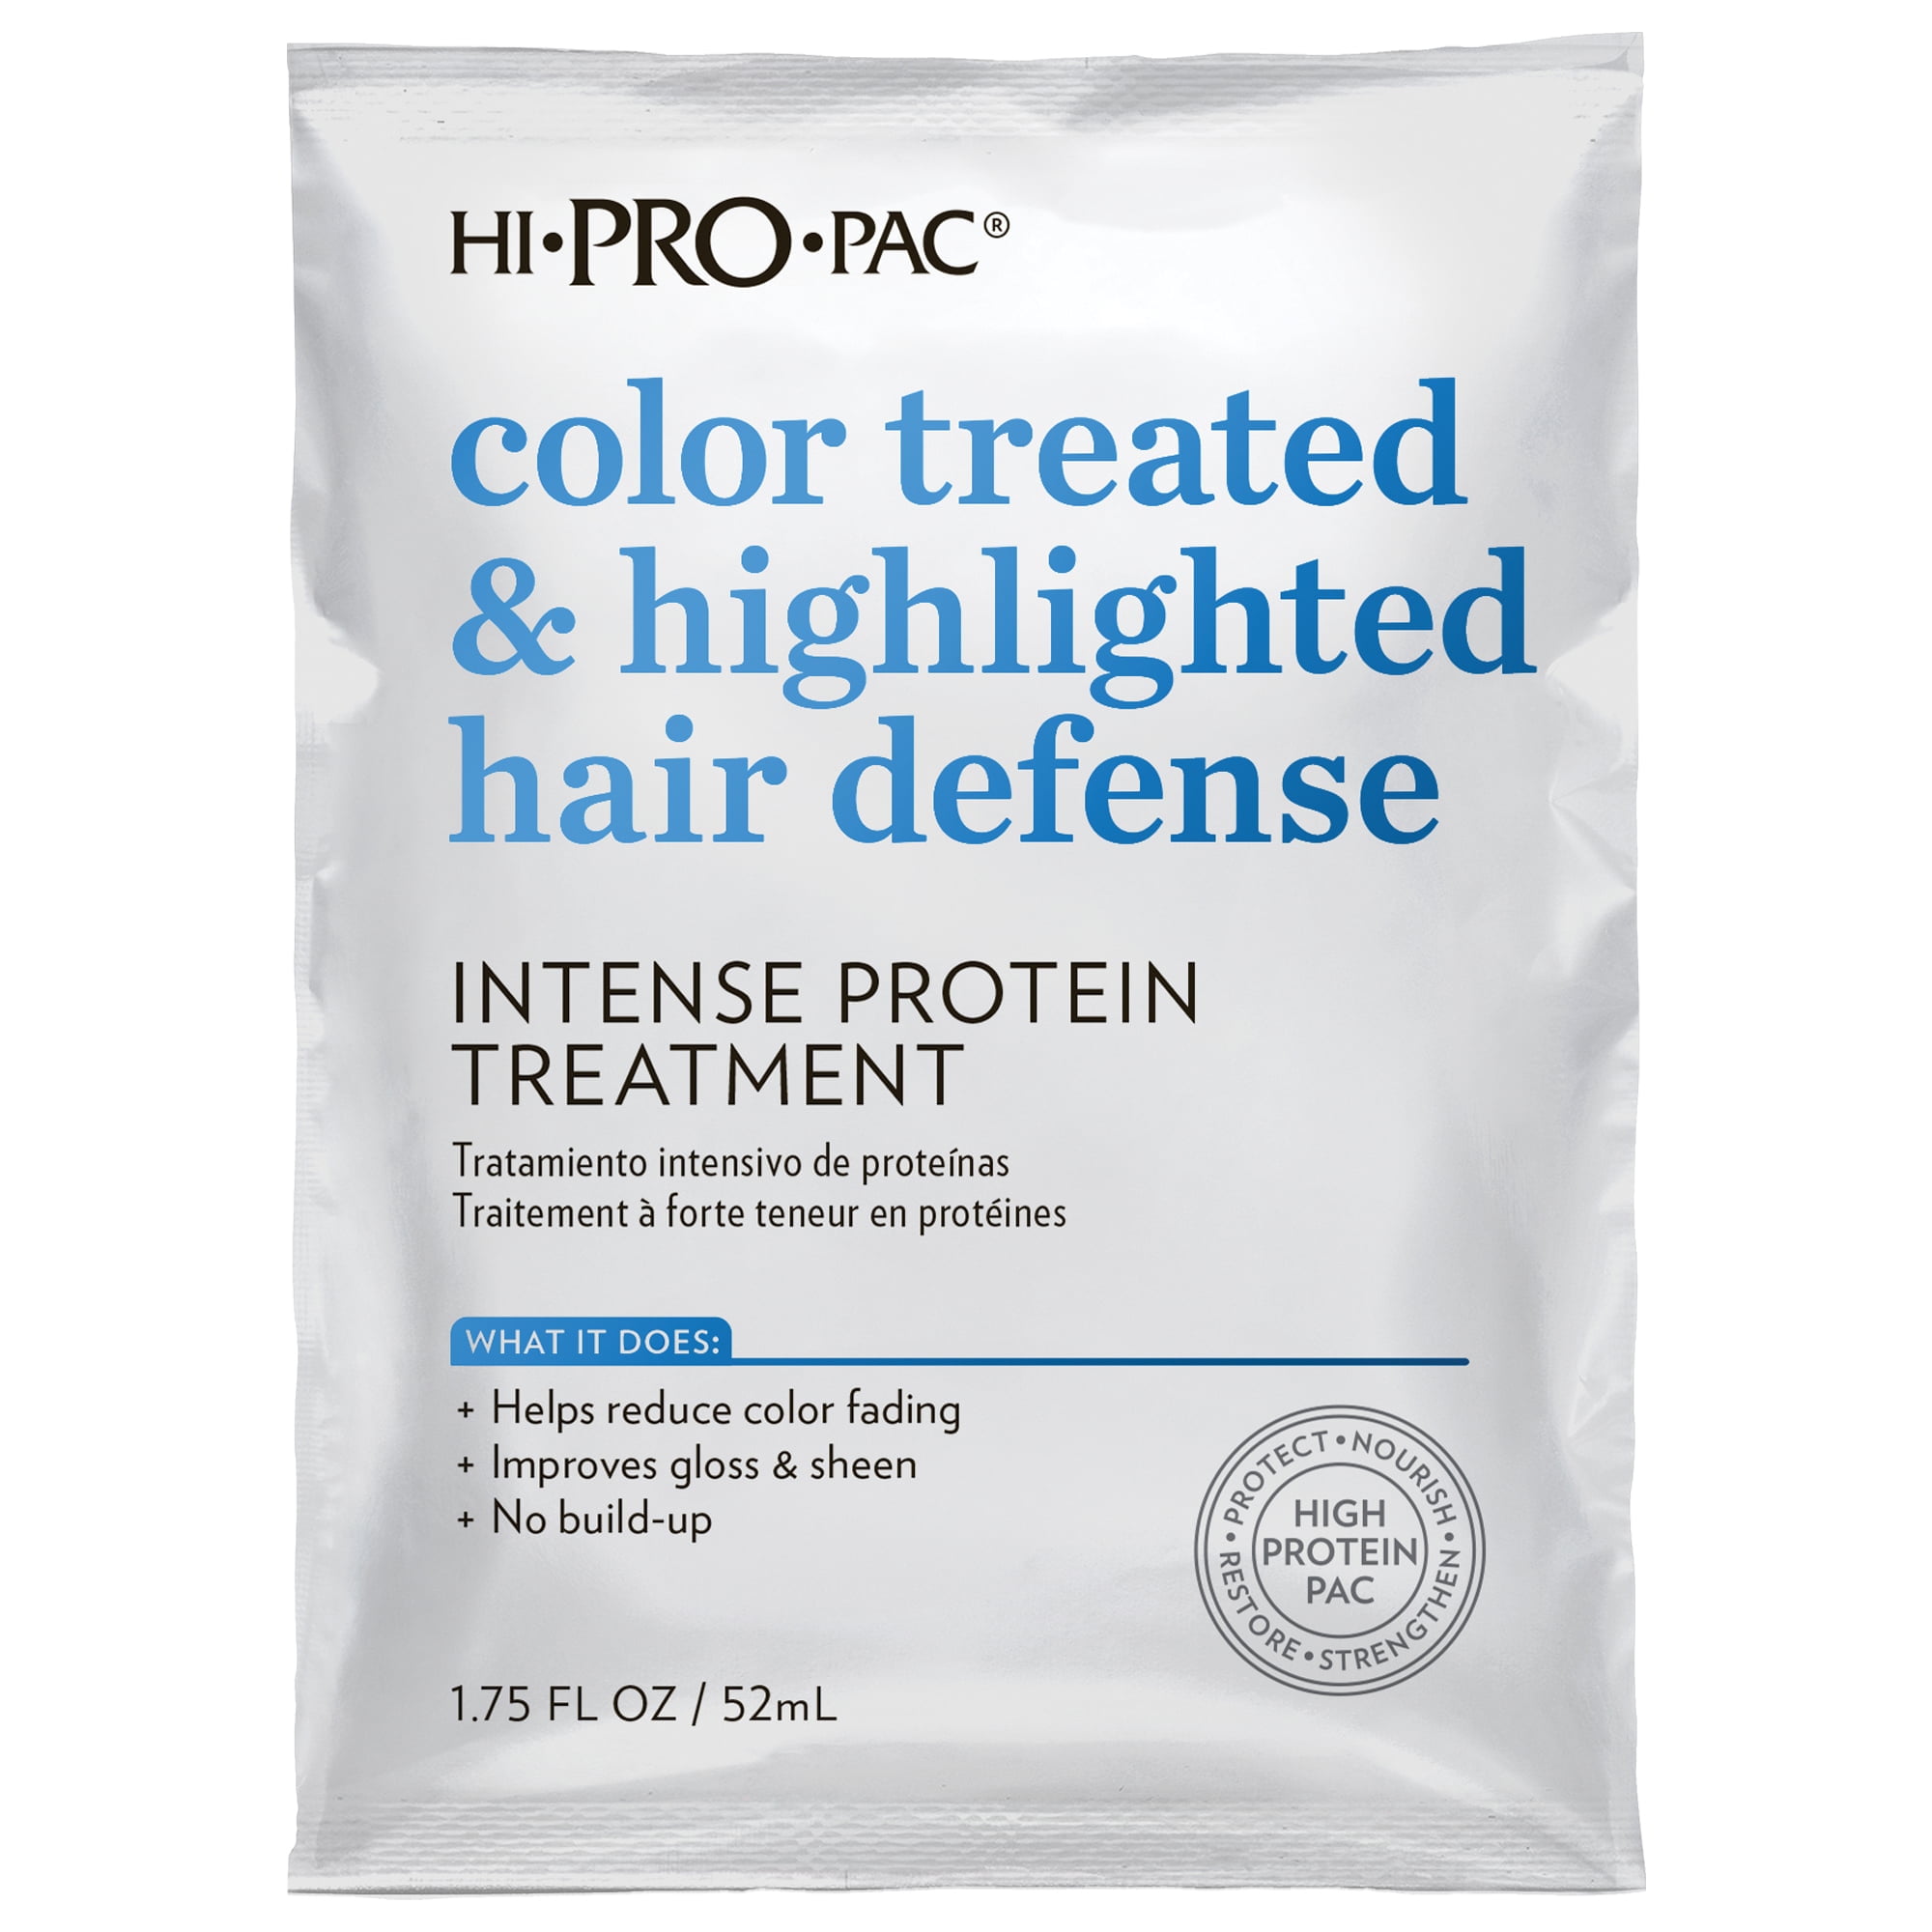 Hi-Pro-Pac Intense Protein Treatment for Color Treated and Highlighted Hair Defense, 1.75 fl oz